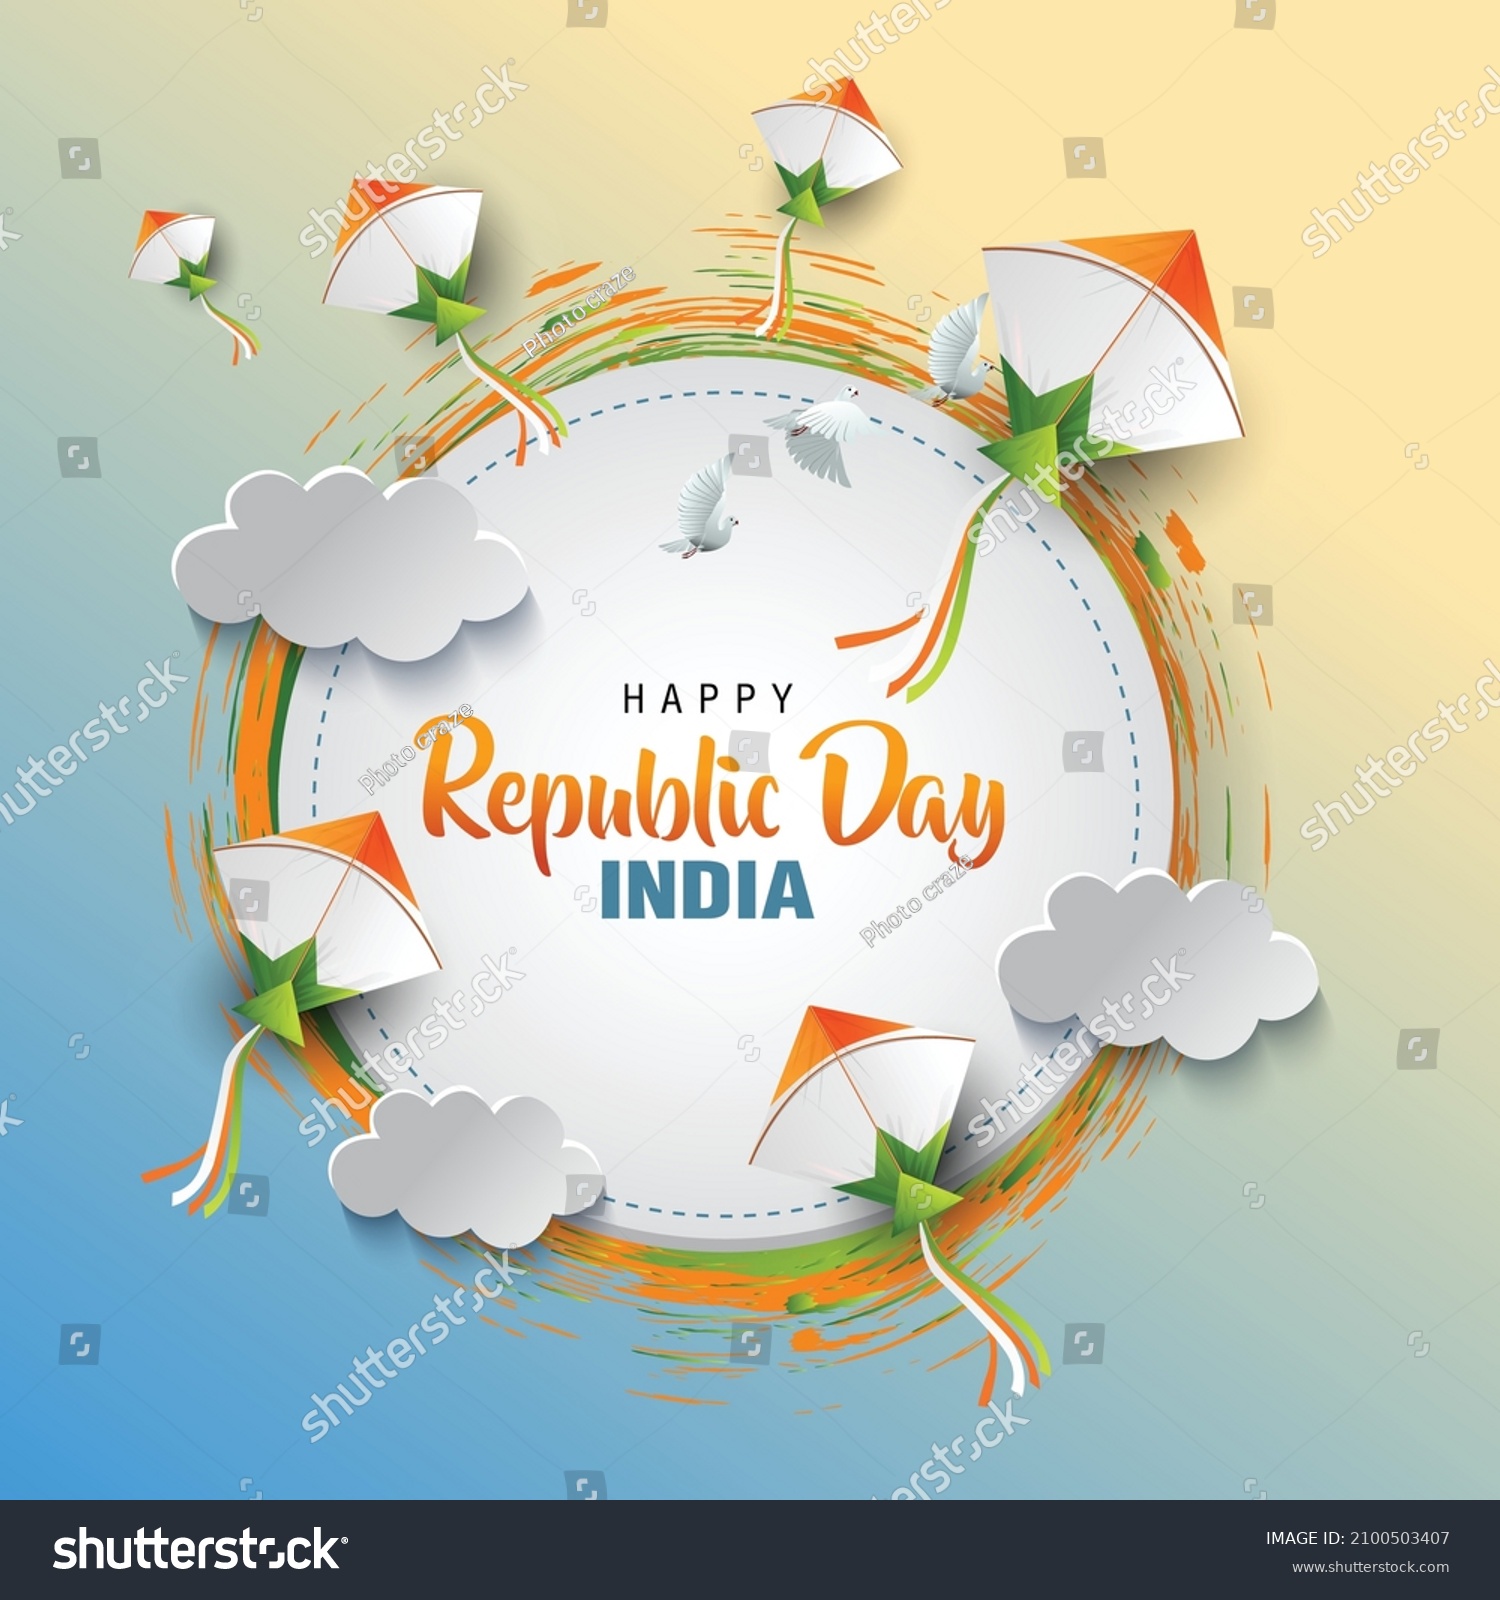 SVG of happy republic day India with flying kites. vector illustration design svg